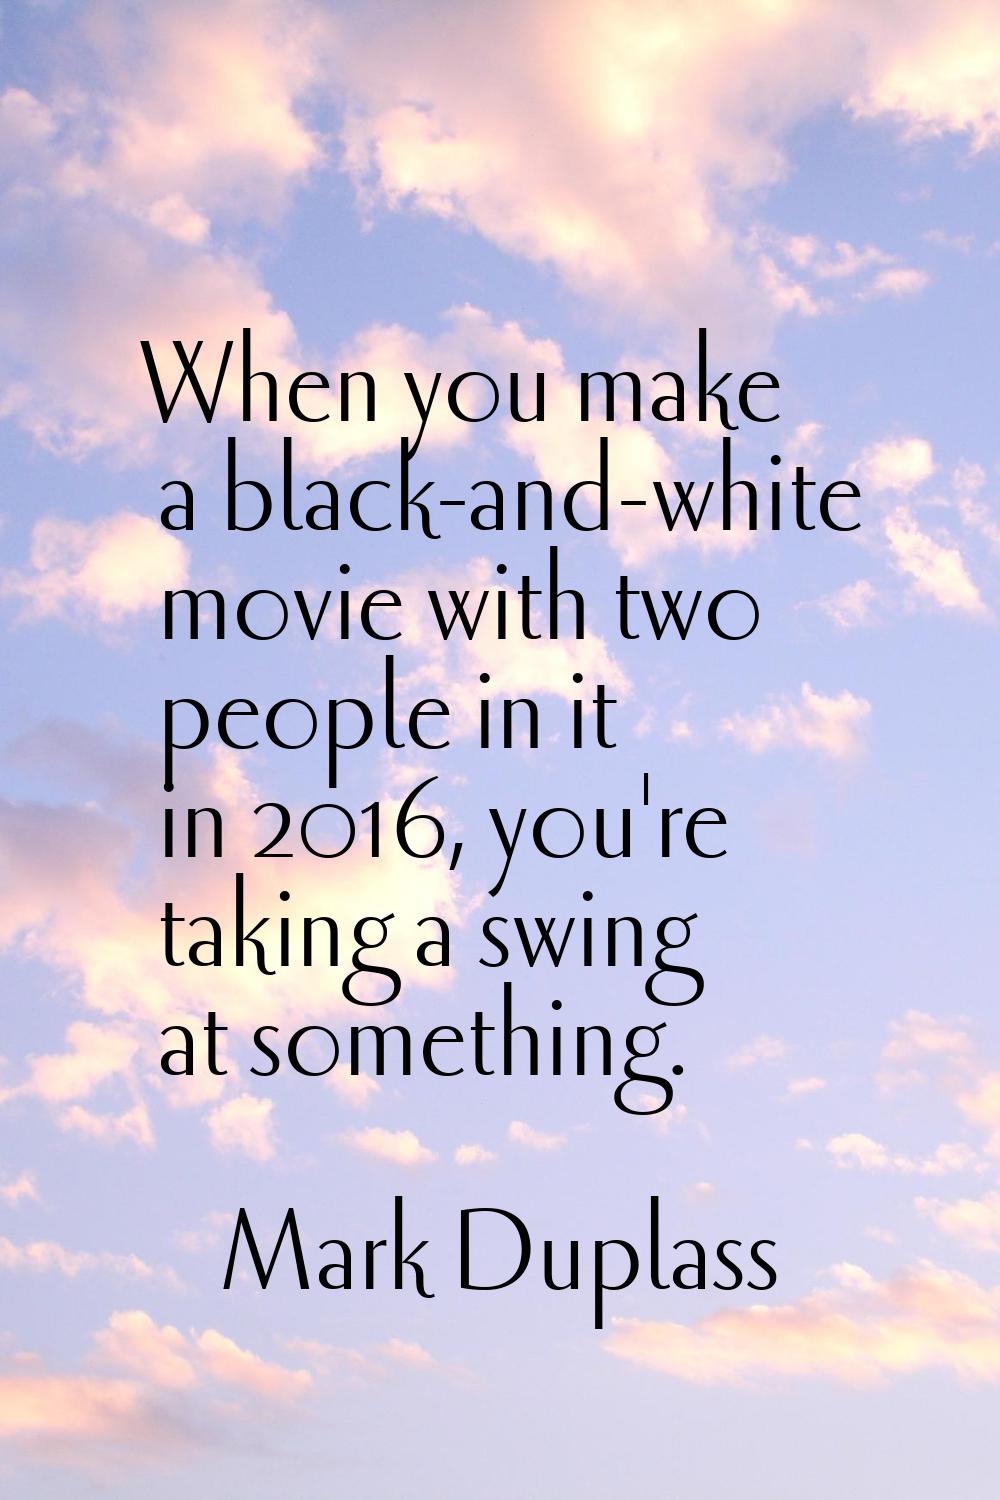 When you make a black-and-white movie with two people in it in 2016, you're taking a swing at somet